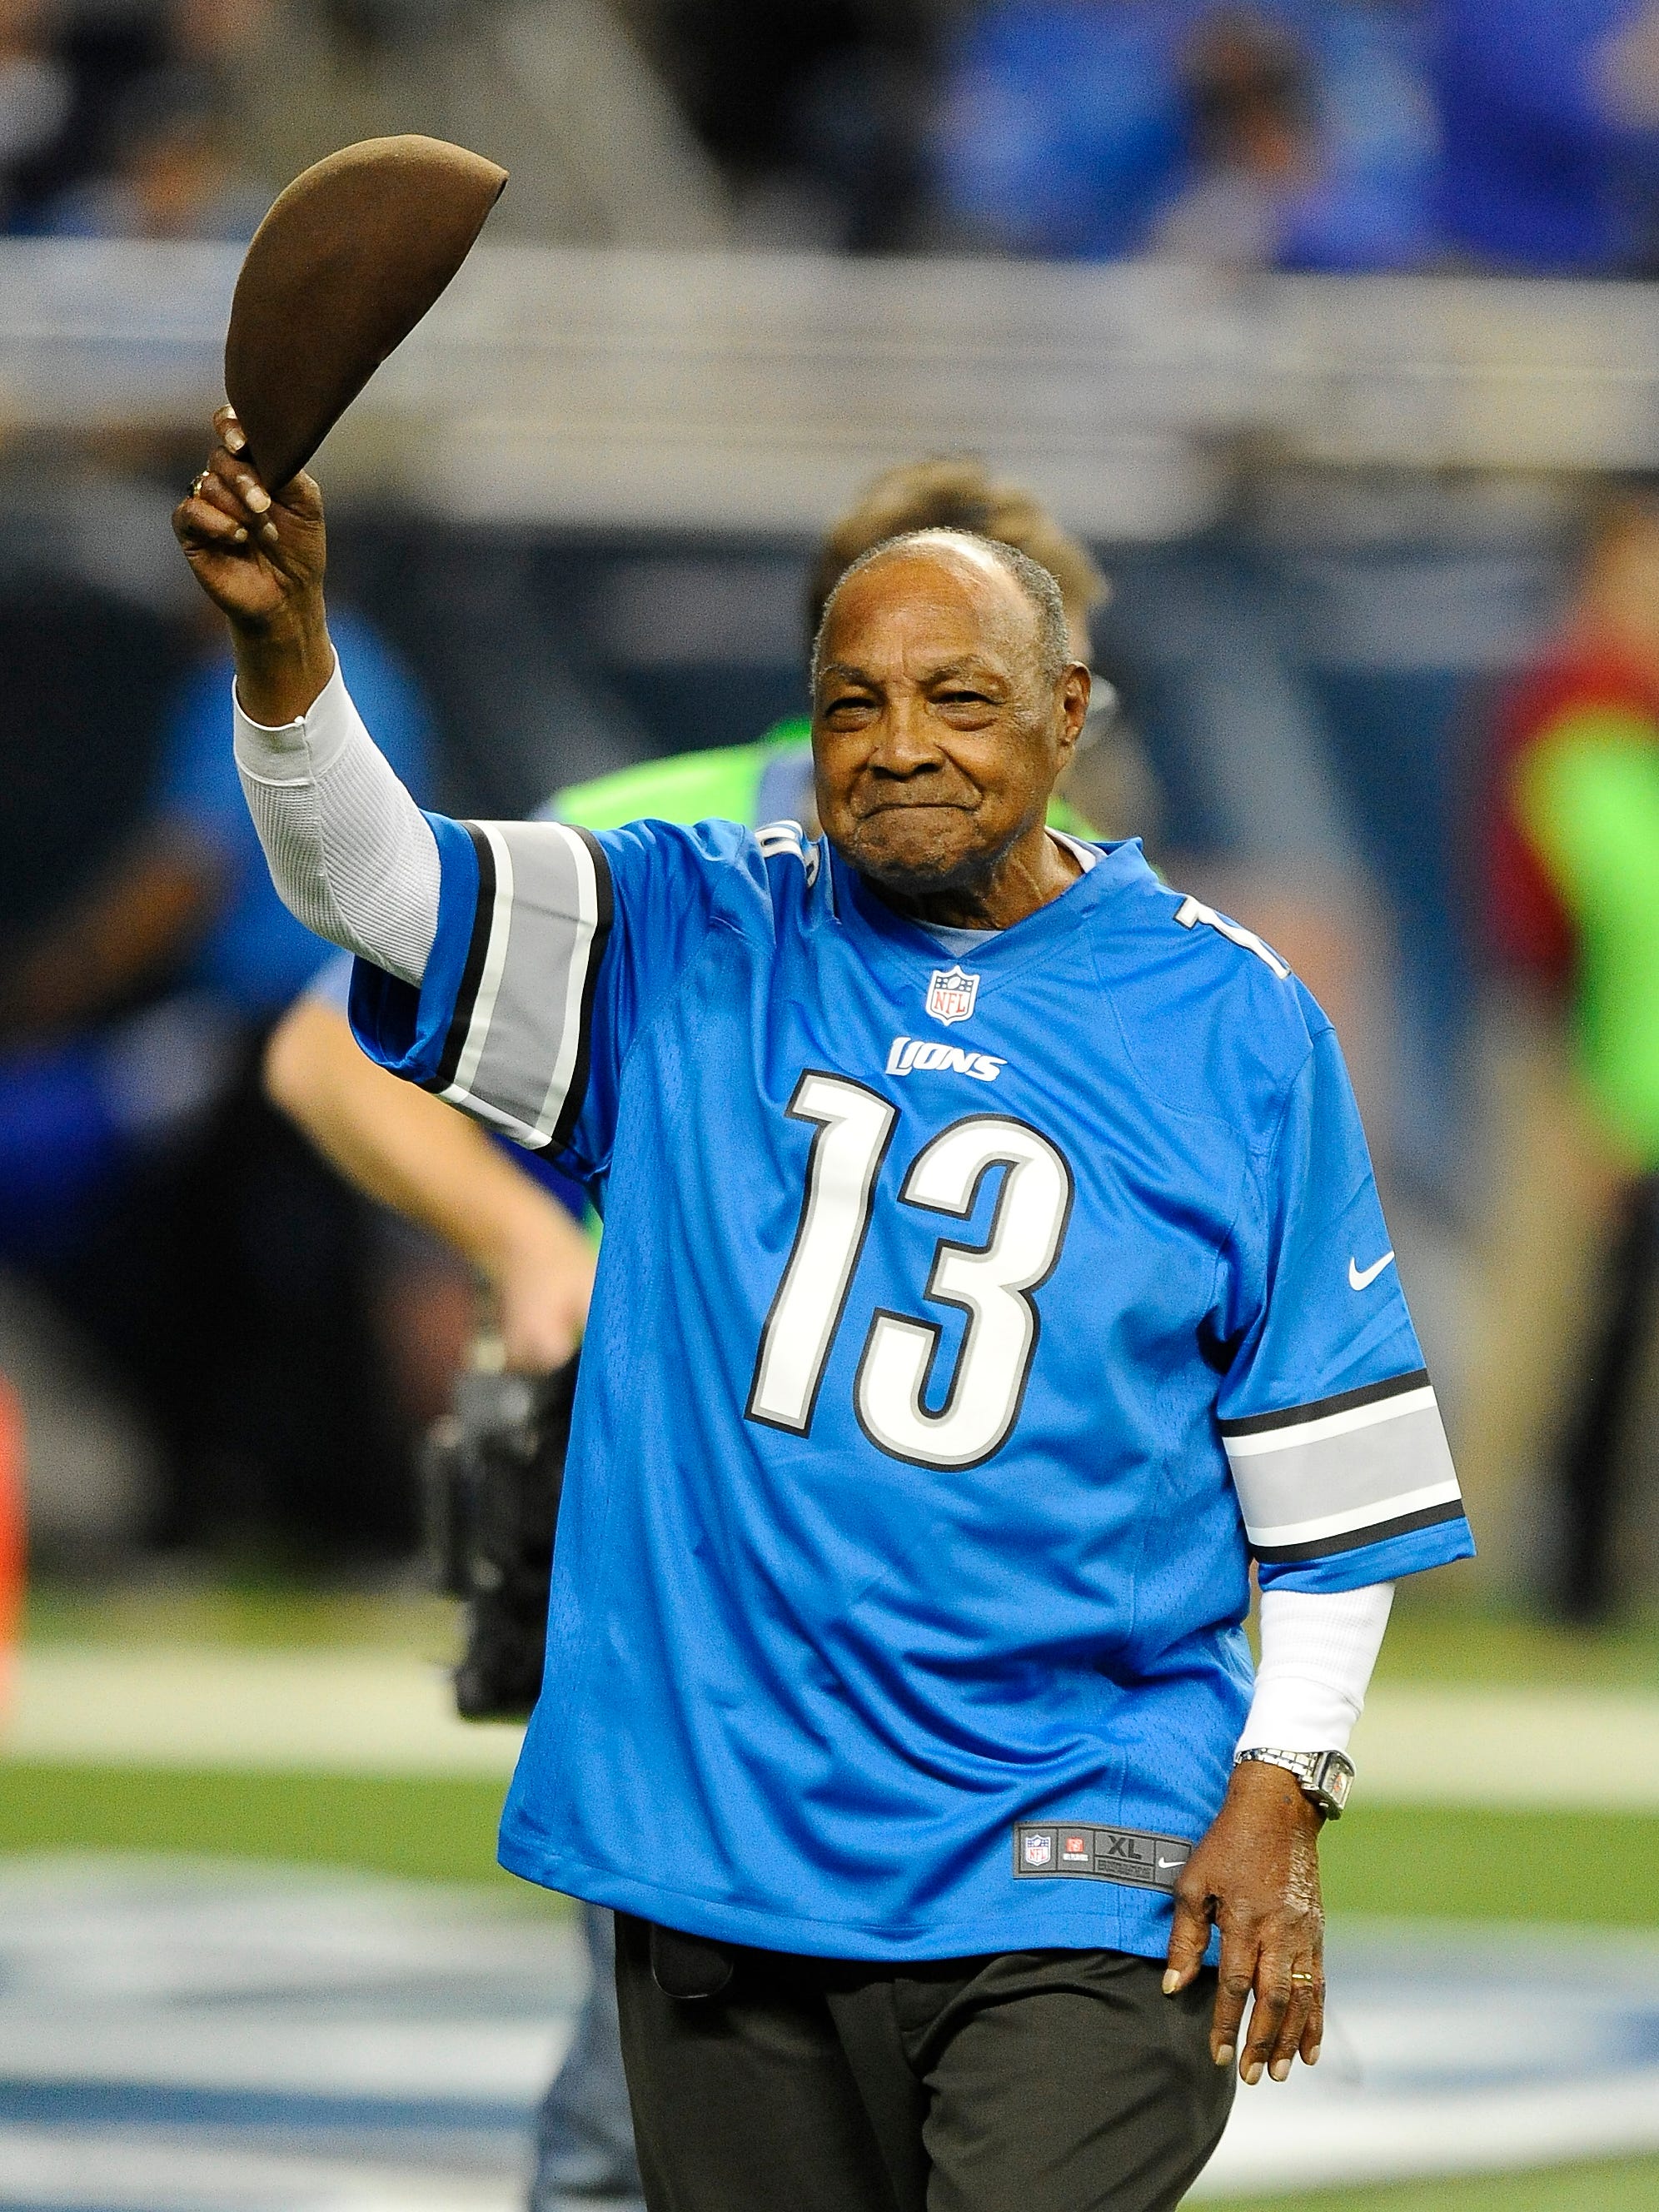 Wally Triplett is introduced during a break in the action of a game against the Baltimore Ravens on Dec.16, 2013.